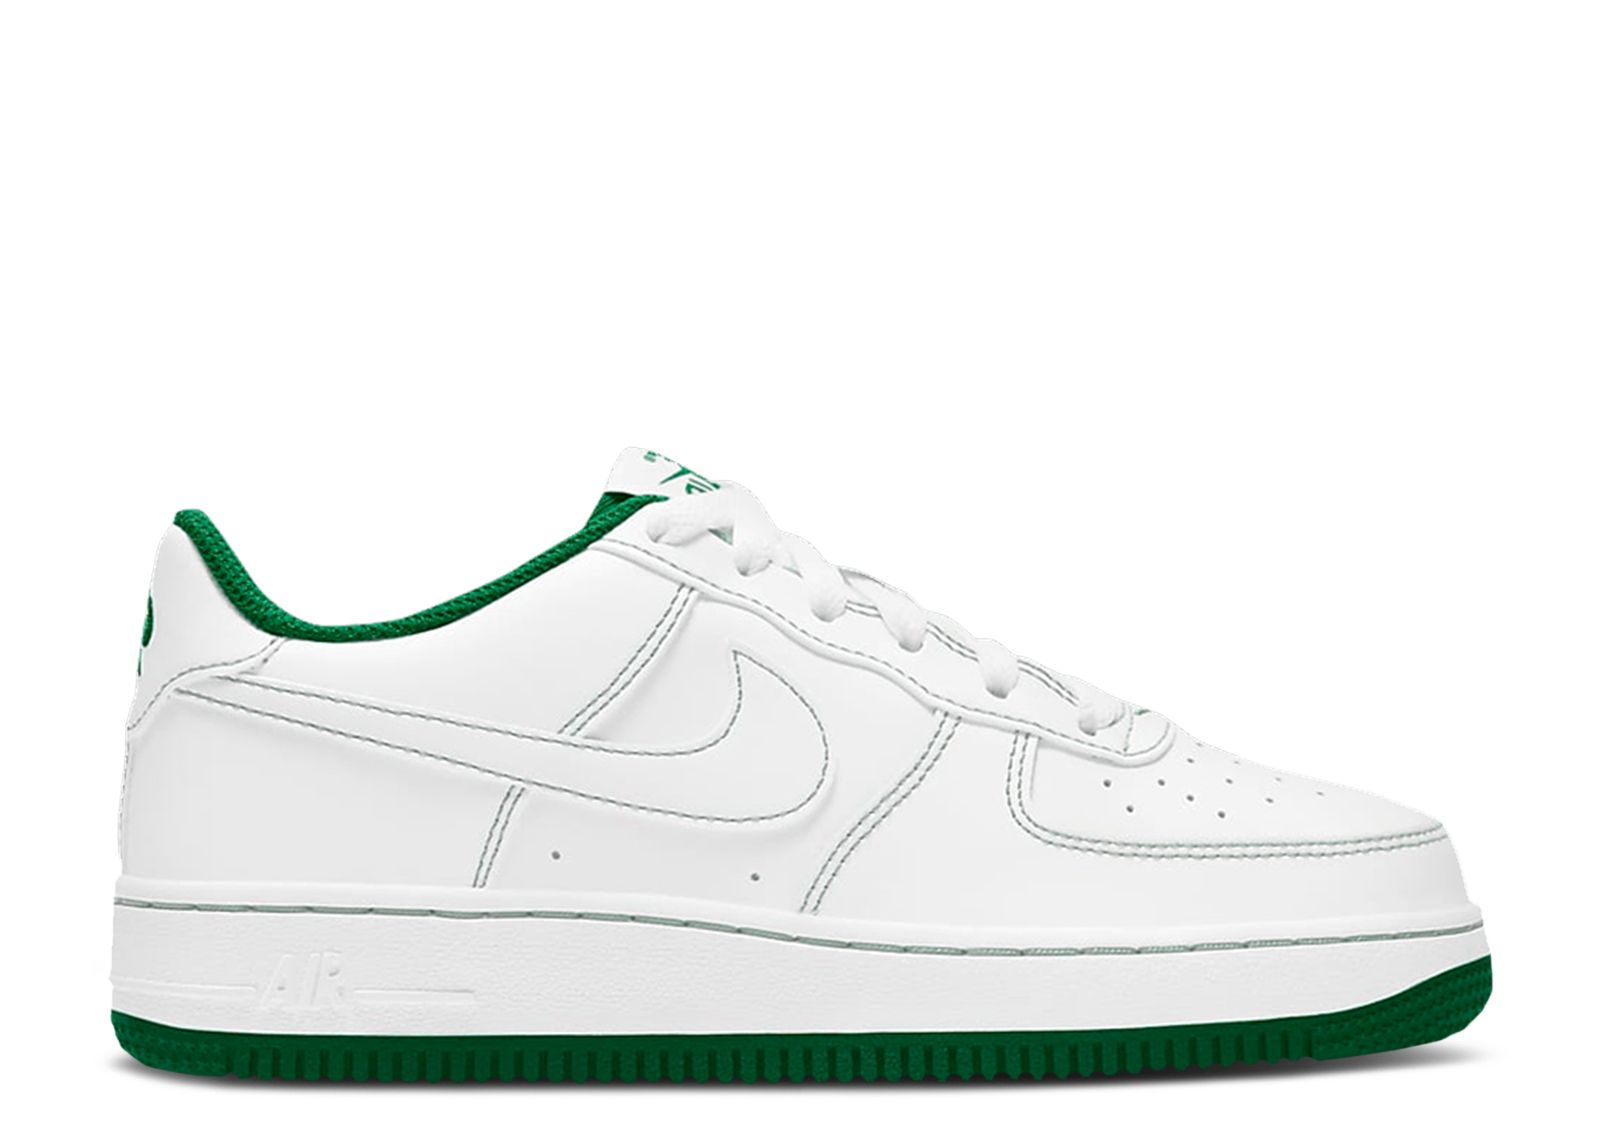 Second Chance - Multi Nike Air Force 1 Low White Pine Green (GS) - 37,5 | NEW